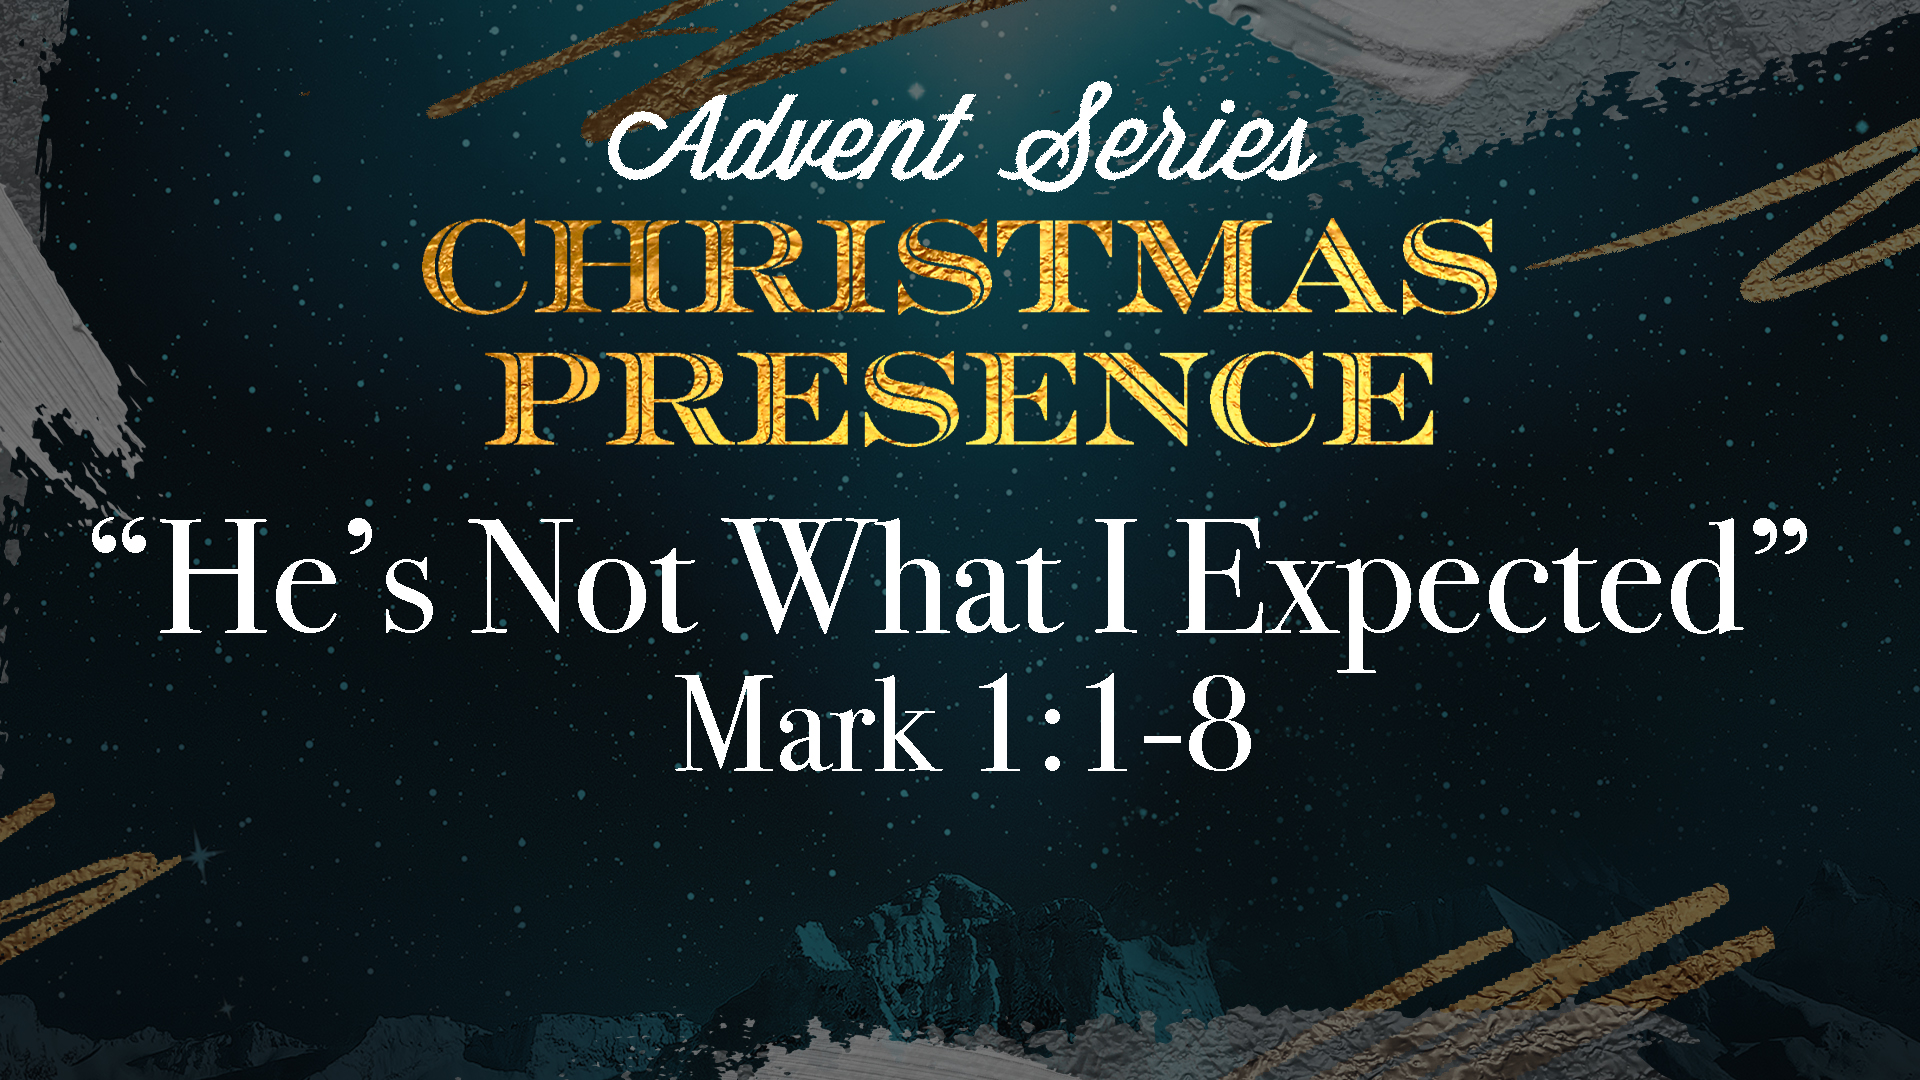 Advent Series: Christmas Presence Part 2 “He’s Not What I Expected” (THRIVE)